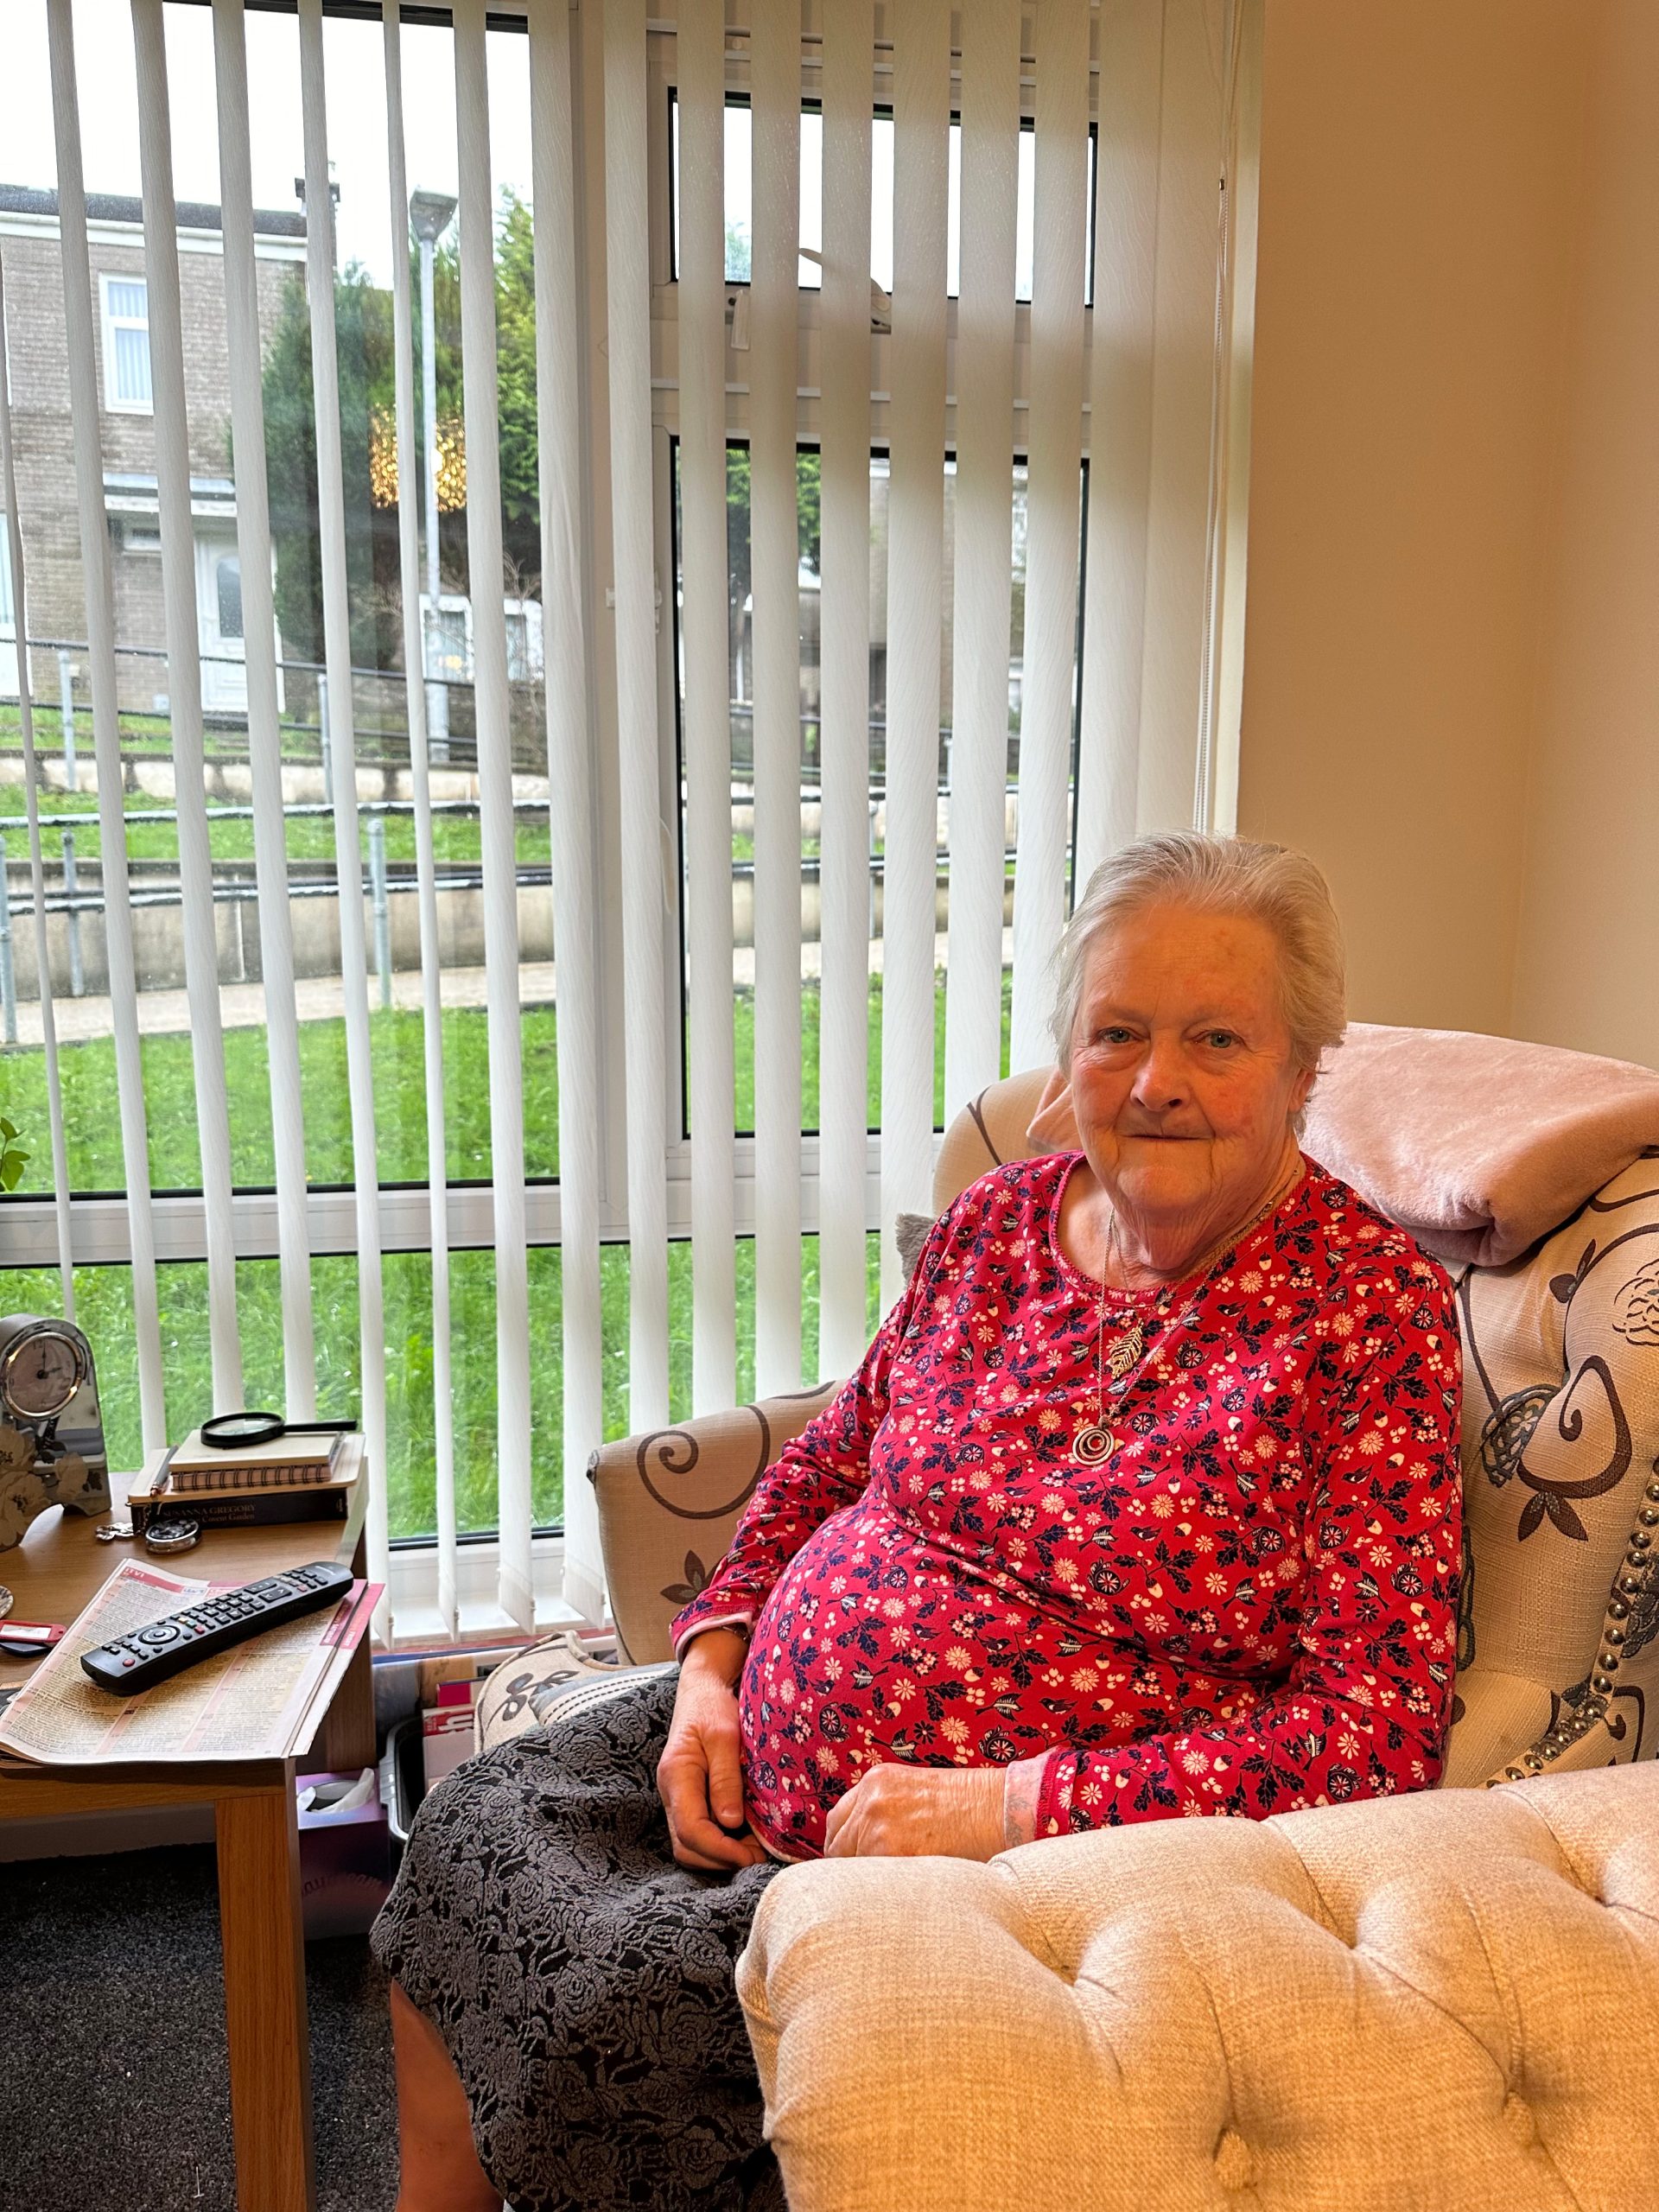 Trivallis Housing Landlord Wales An elderly lady sitting comfortably in a well-lit room with a pleasant smile, surrounded by a cozy home environment.